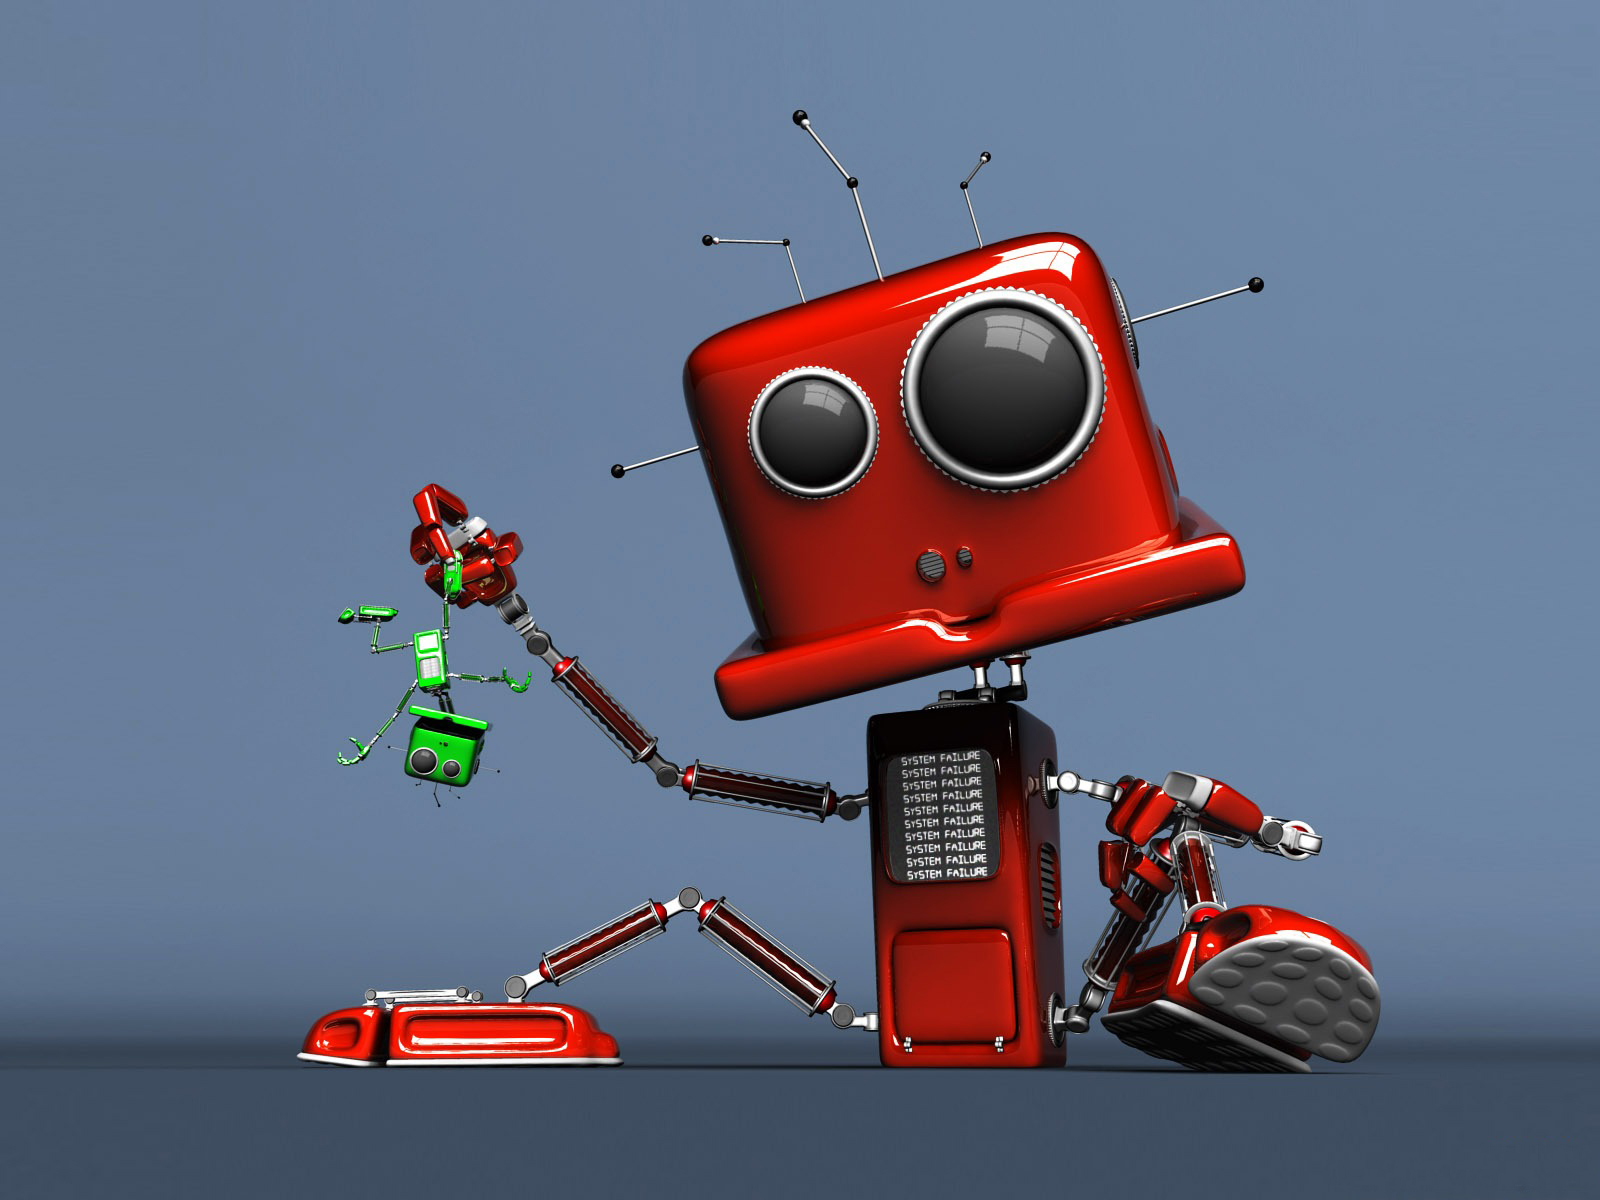 Free download Free Cute Red Robot computer desktop wallpaper picture image [1600x1200] for your Desktop, Mobile & Tablet. Explore Cute Robot Wallpaper. Robot Wallpaper, Robot Wallpaper, Robot Wallpaper HD